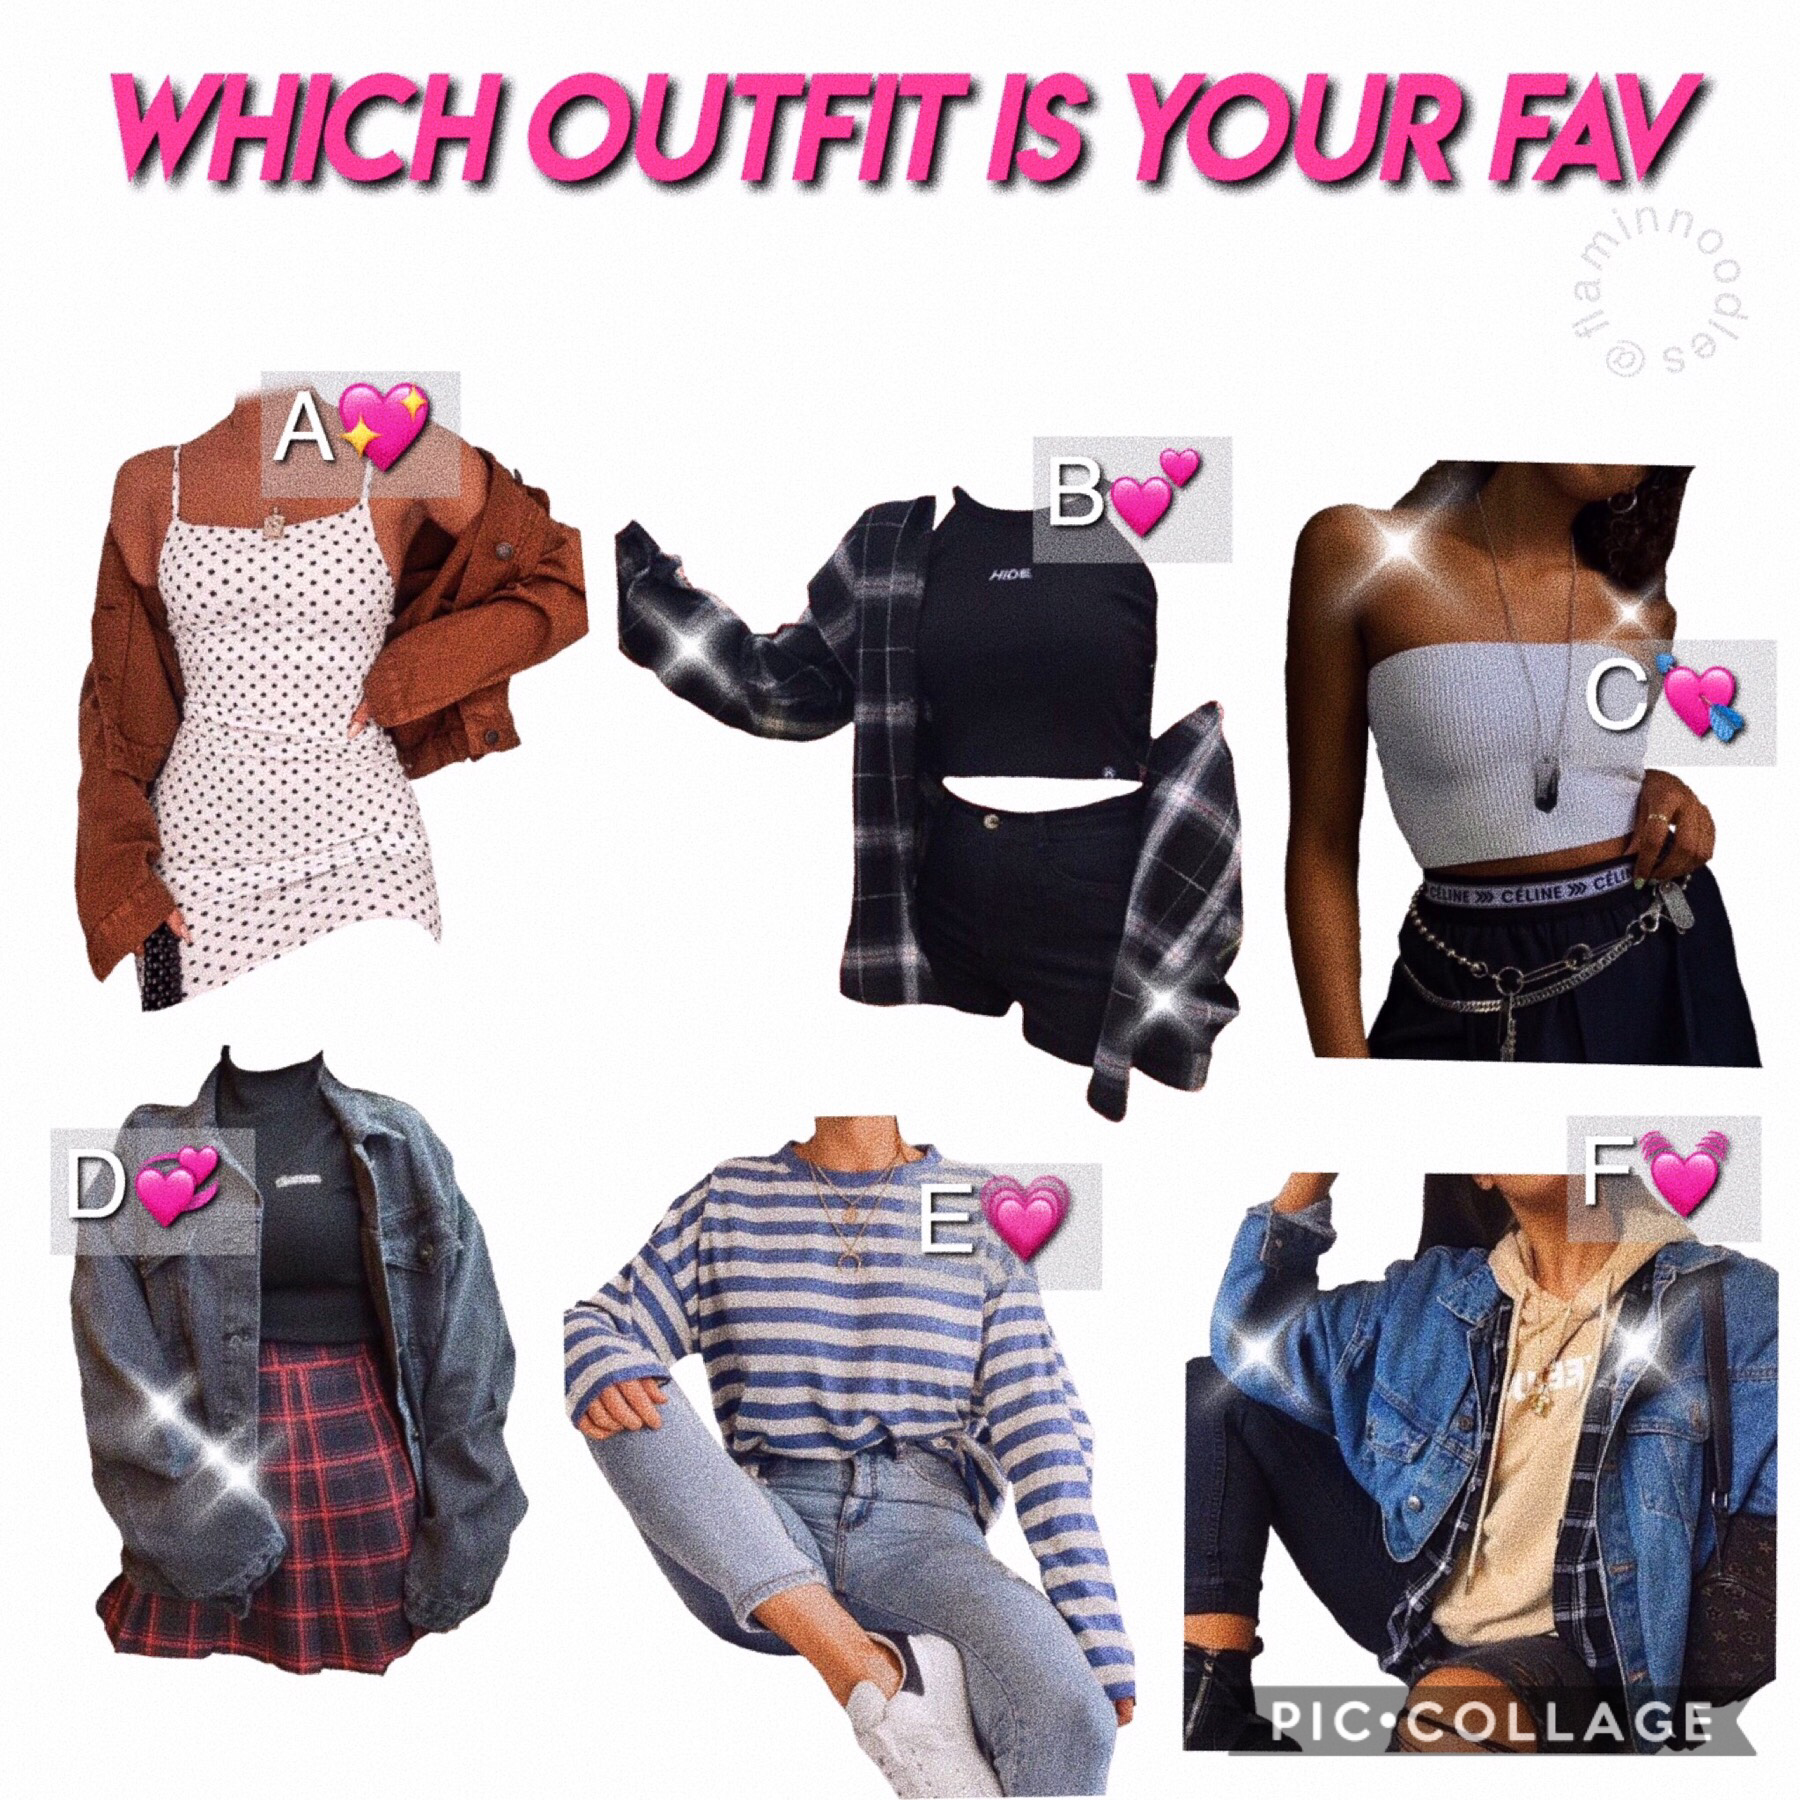 💖Tap💖
- Heyyyy guys I’m back ik i said I’ll try to post more frequently but tbh school happened 🙃
- Qotd: what’s your favorite ice cream and if you don’t like ice cream, favorite dessert?
- choose which is your favorite outfit :)

